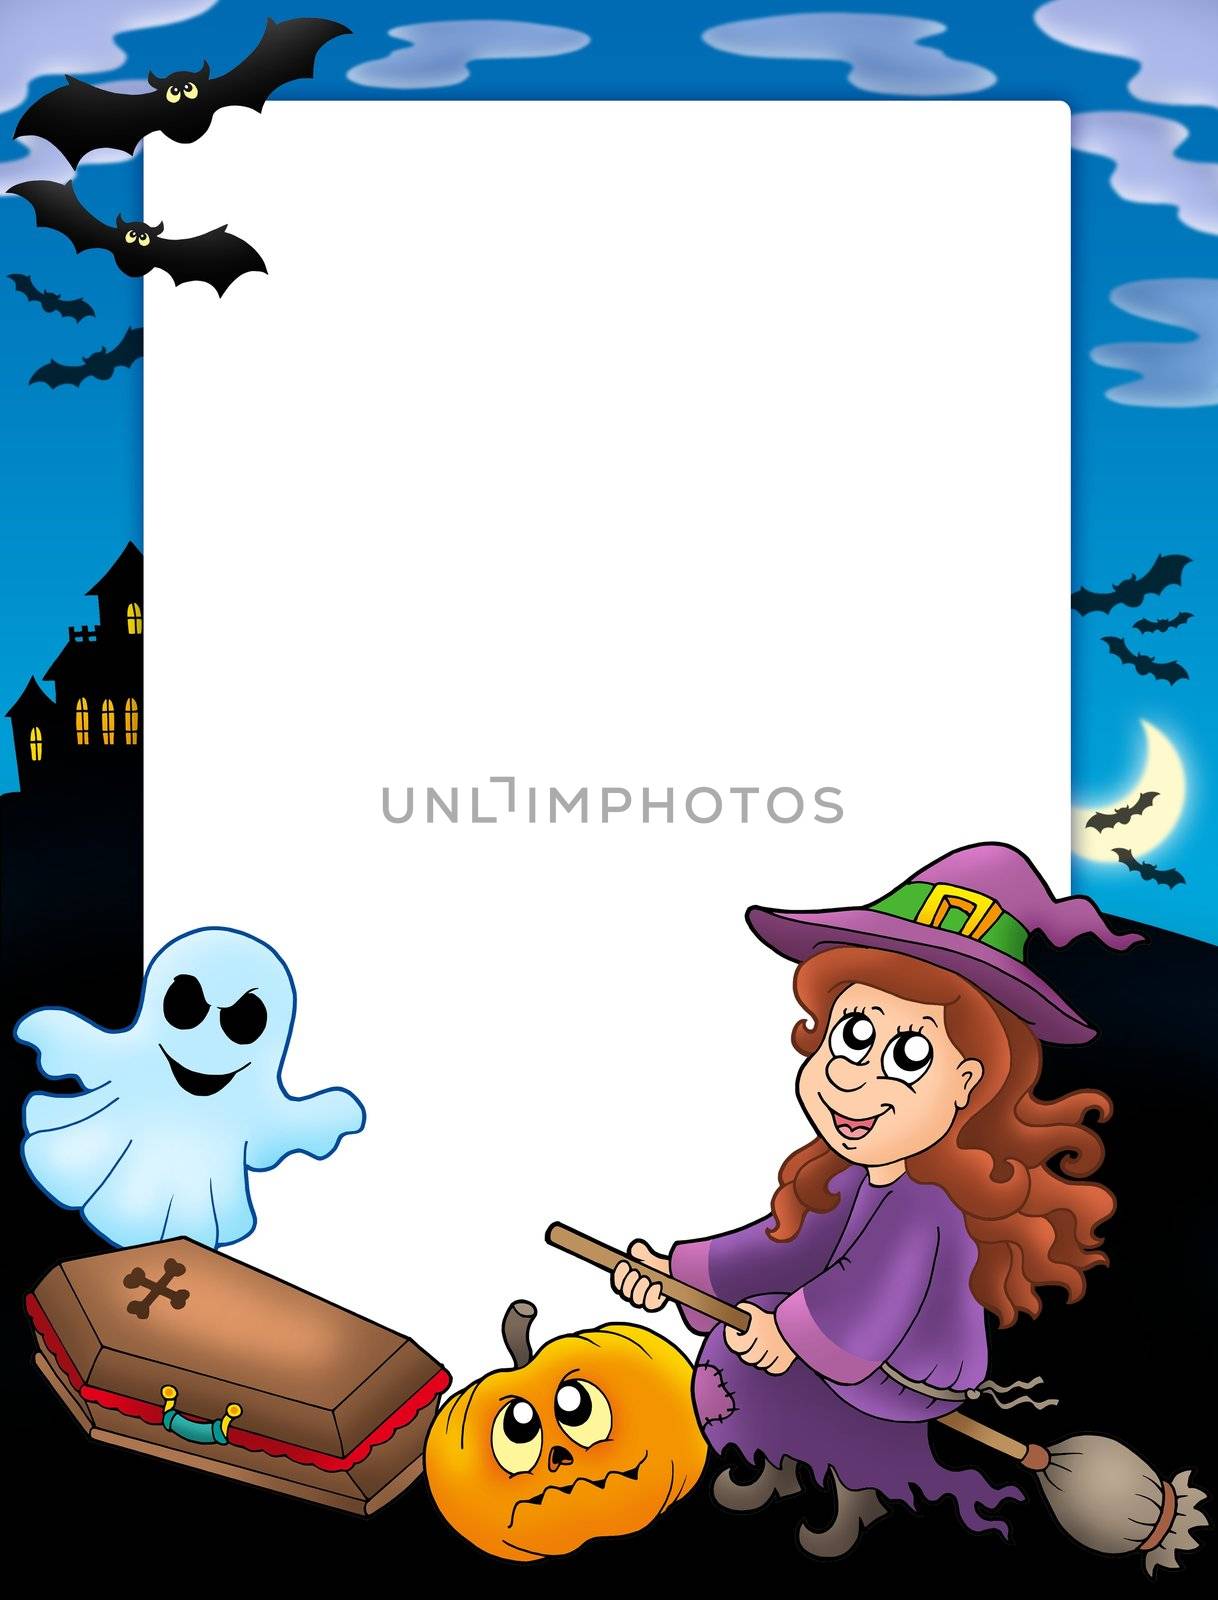 Halloween frame 3 with various objects - color illustration.